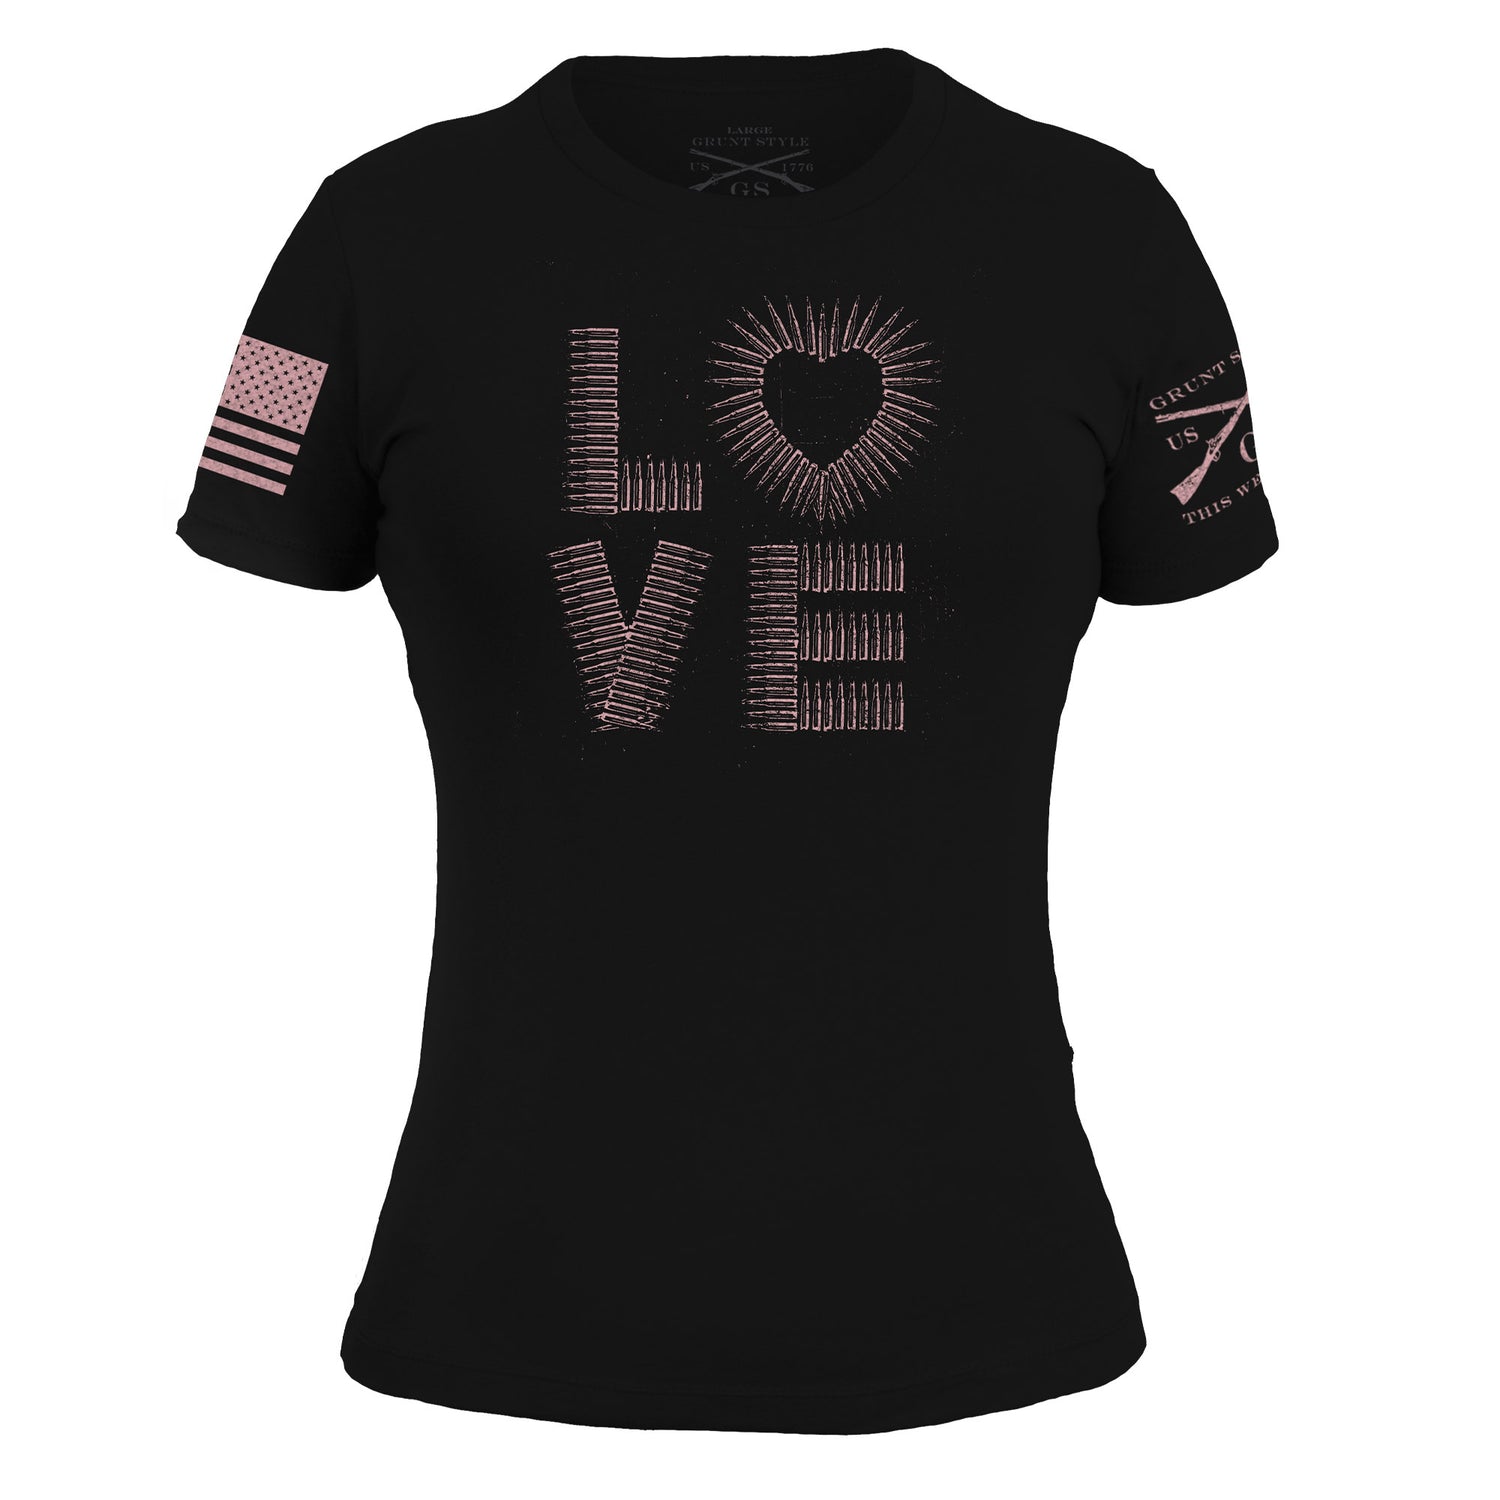 Women's 2nd amendment t-shirt with a slim fit that says LOVE  using the shapes of ammo or ammunition 